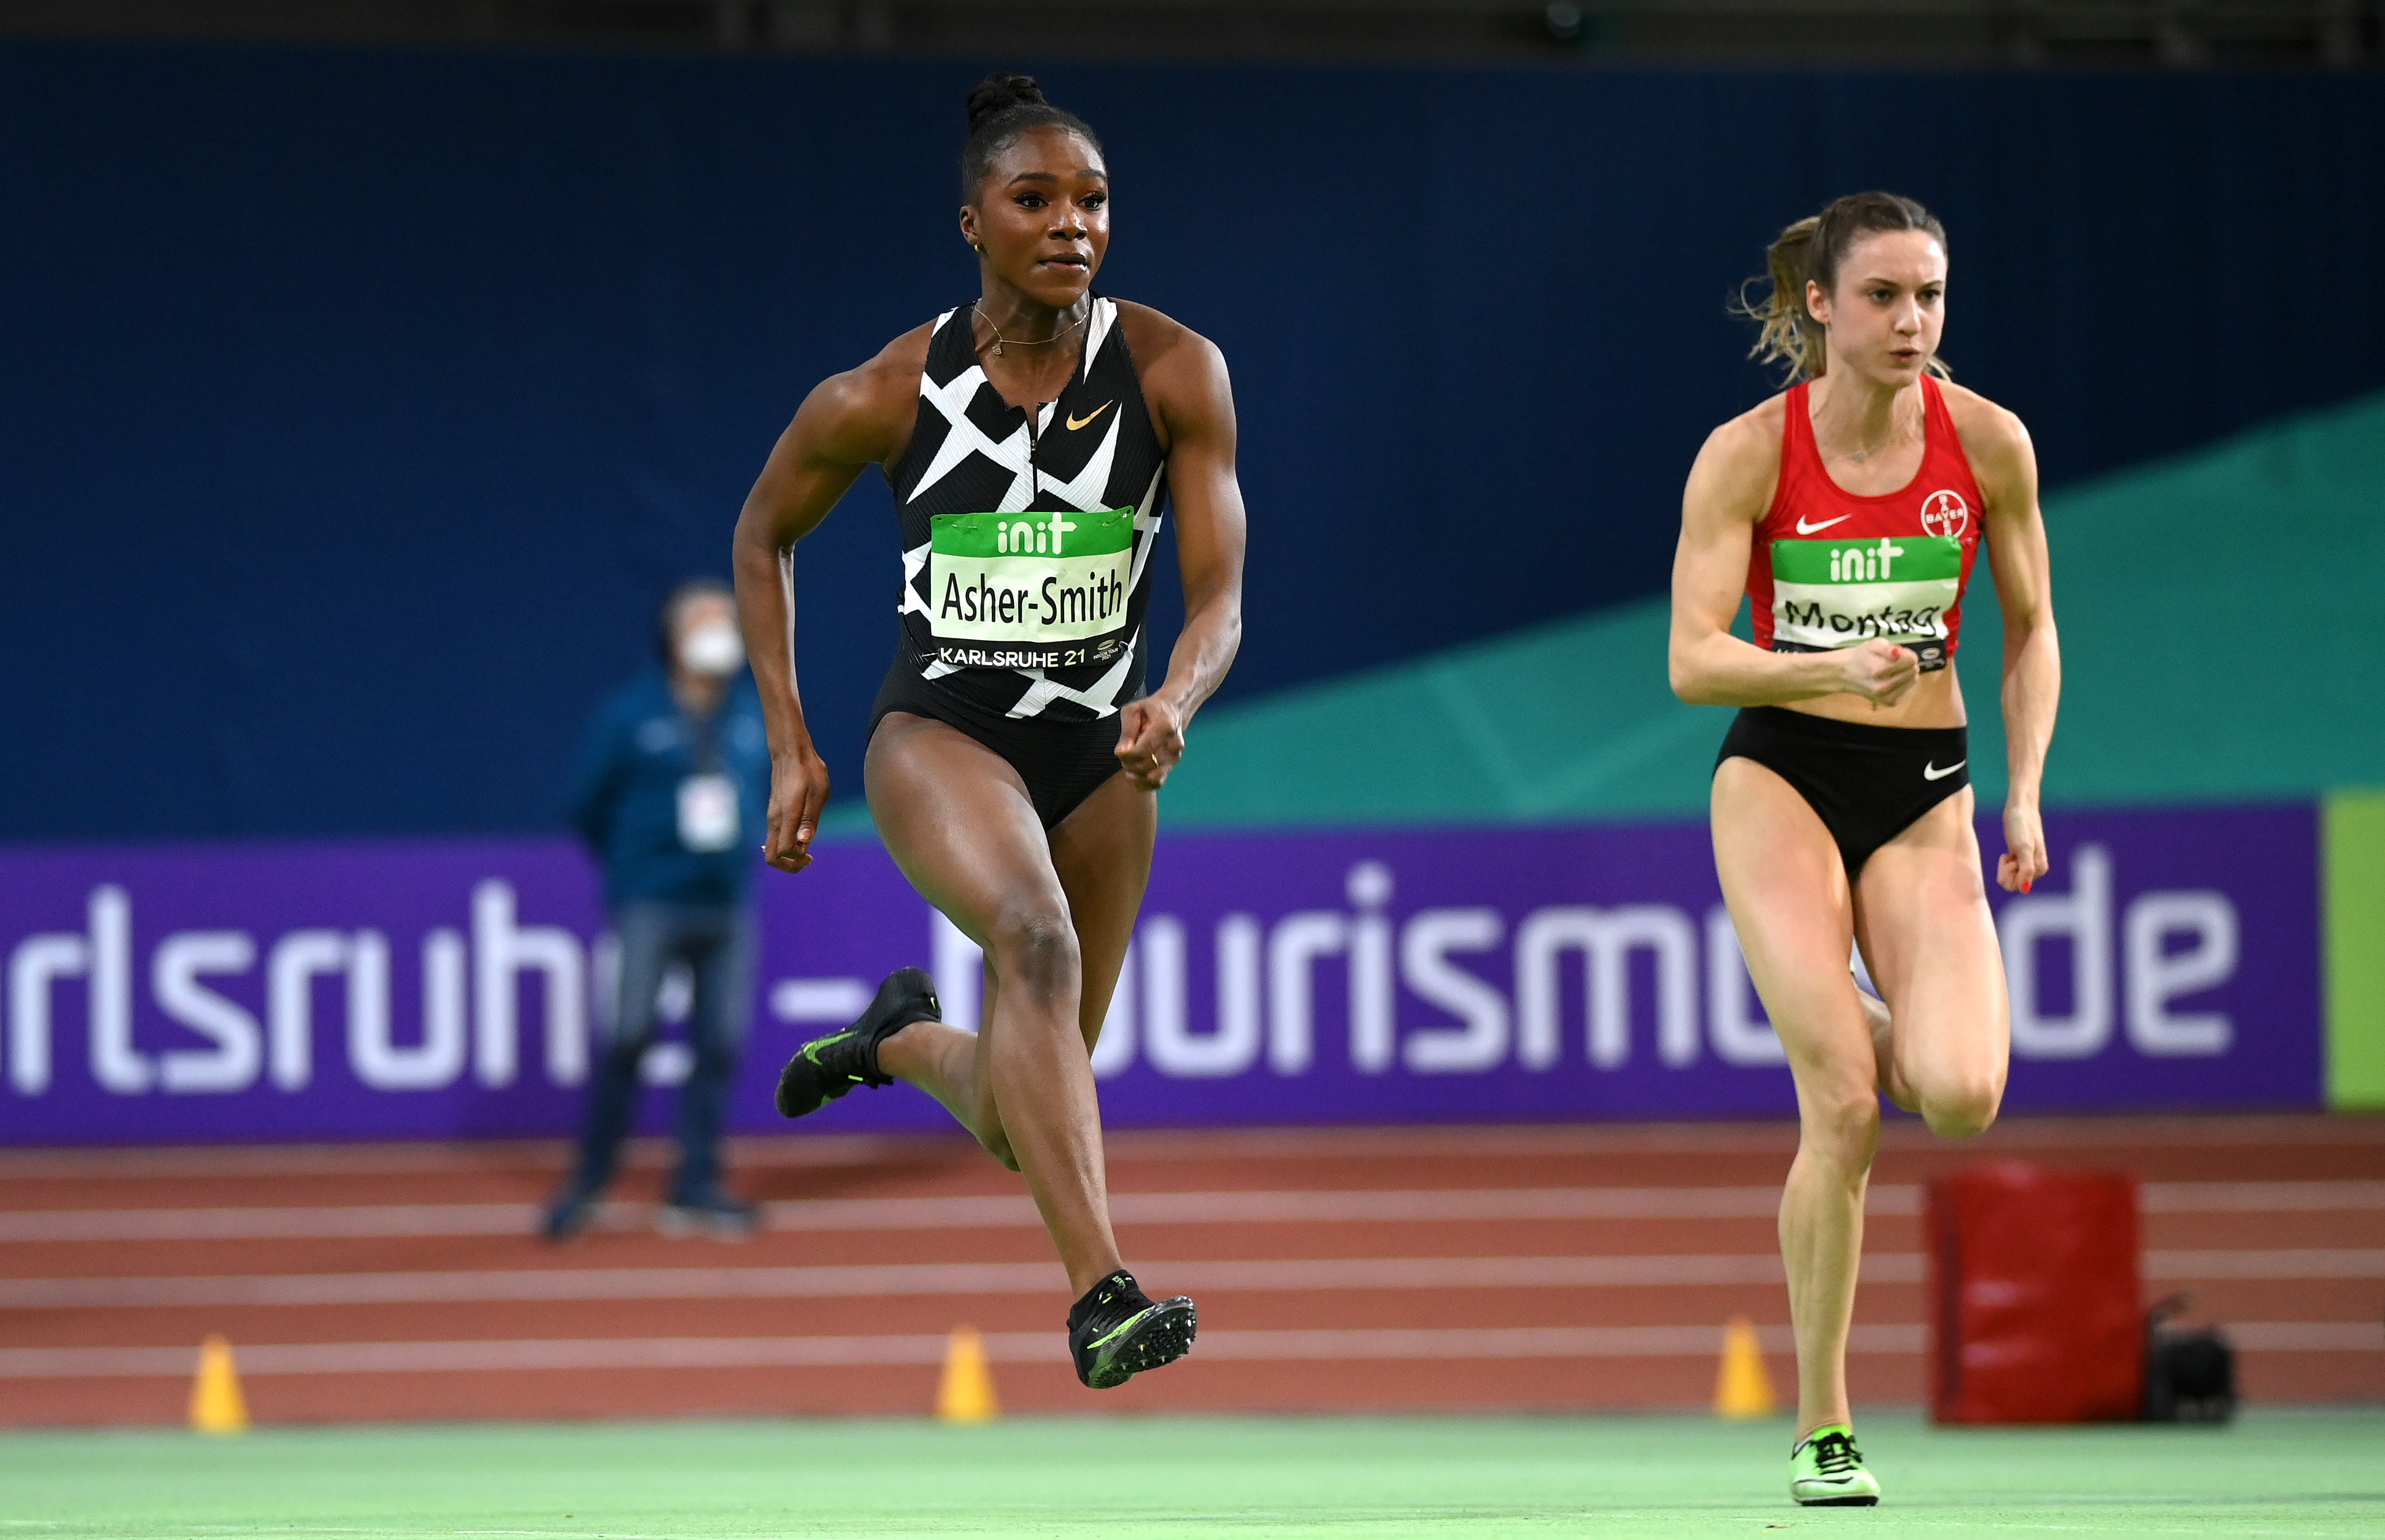 ASHER-SMITH AND GILES TRIUMPH AT WORLD ATHLETICS INDOOR TOUR GOLD MEETING